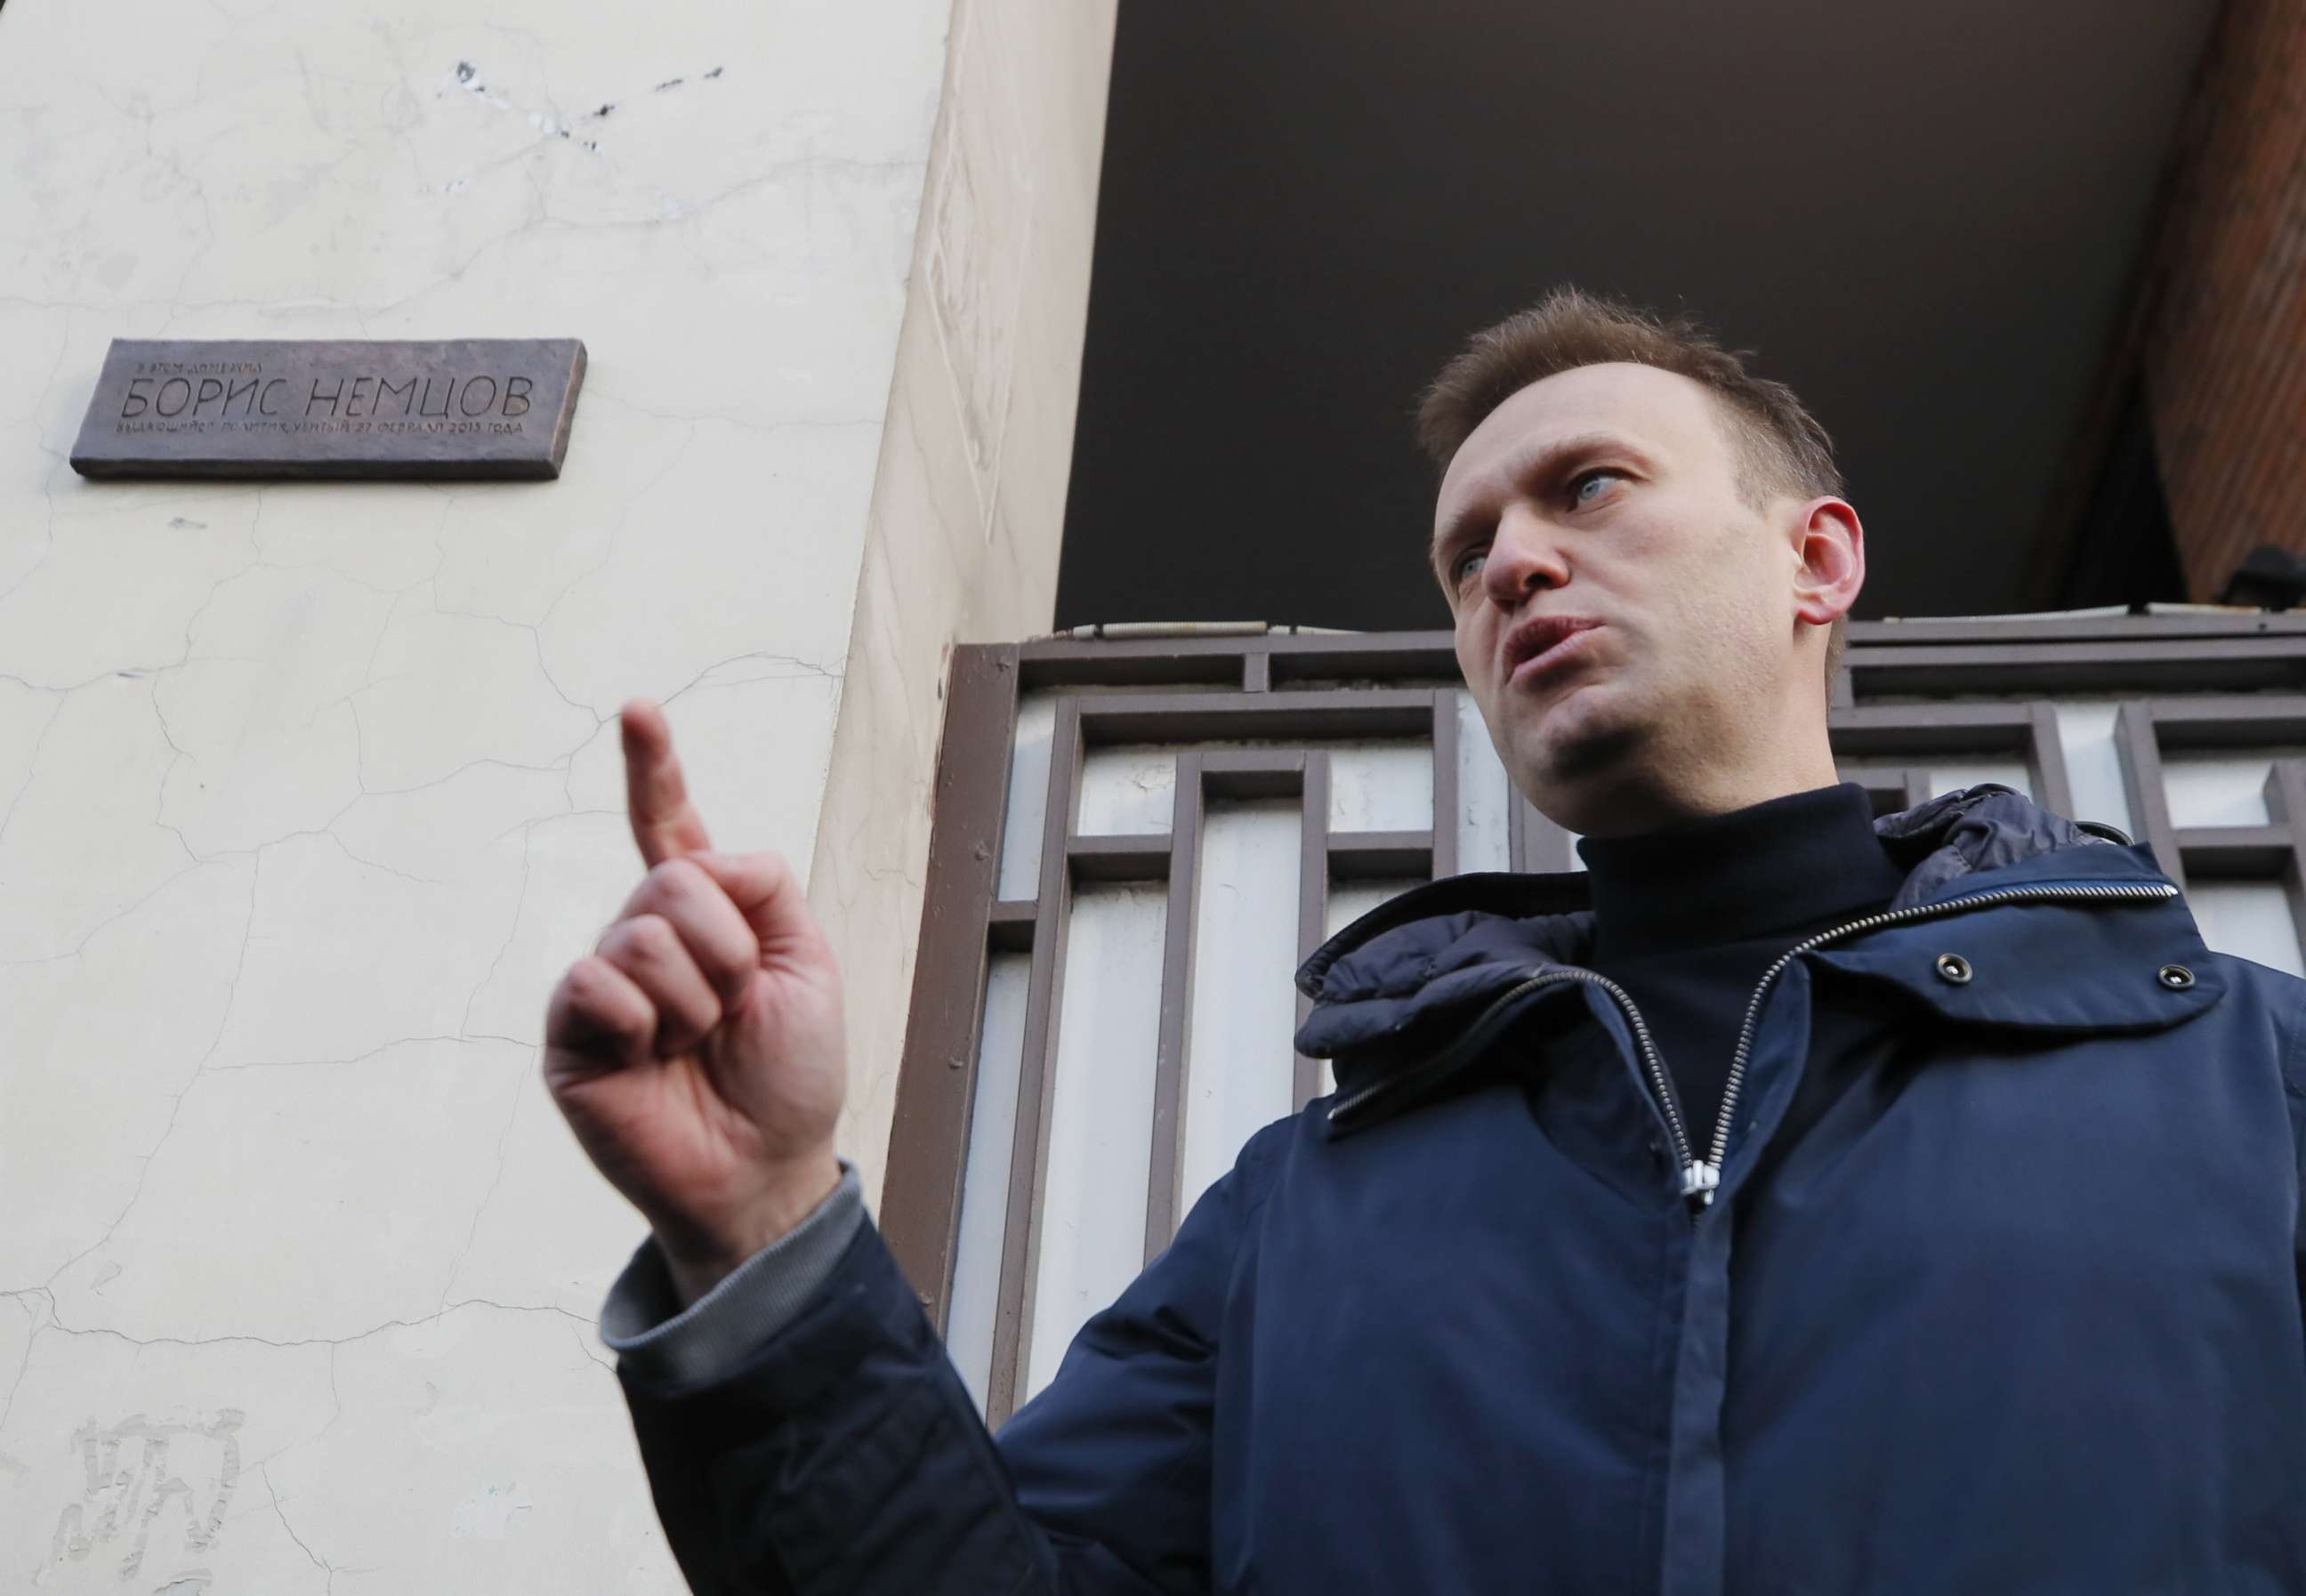 PHOTO: Russian opposition leader Alexei Navalny delivers a speech near a commemorative plaque in honor of slain Russian opposition figure Boris Nemtsov during a ceremony in Moscow, March 17, 2018.